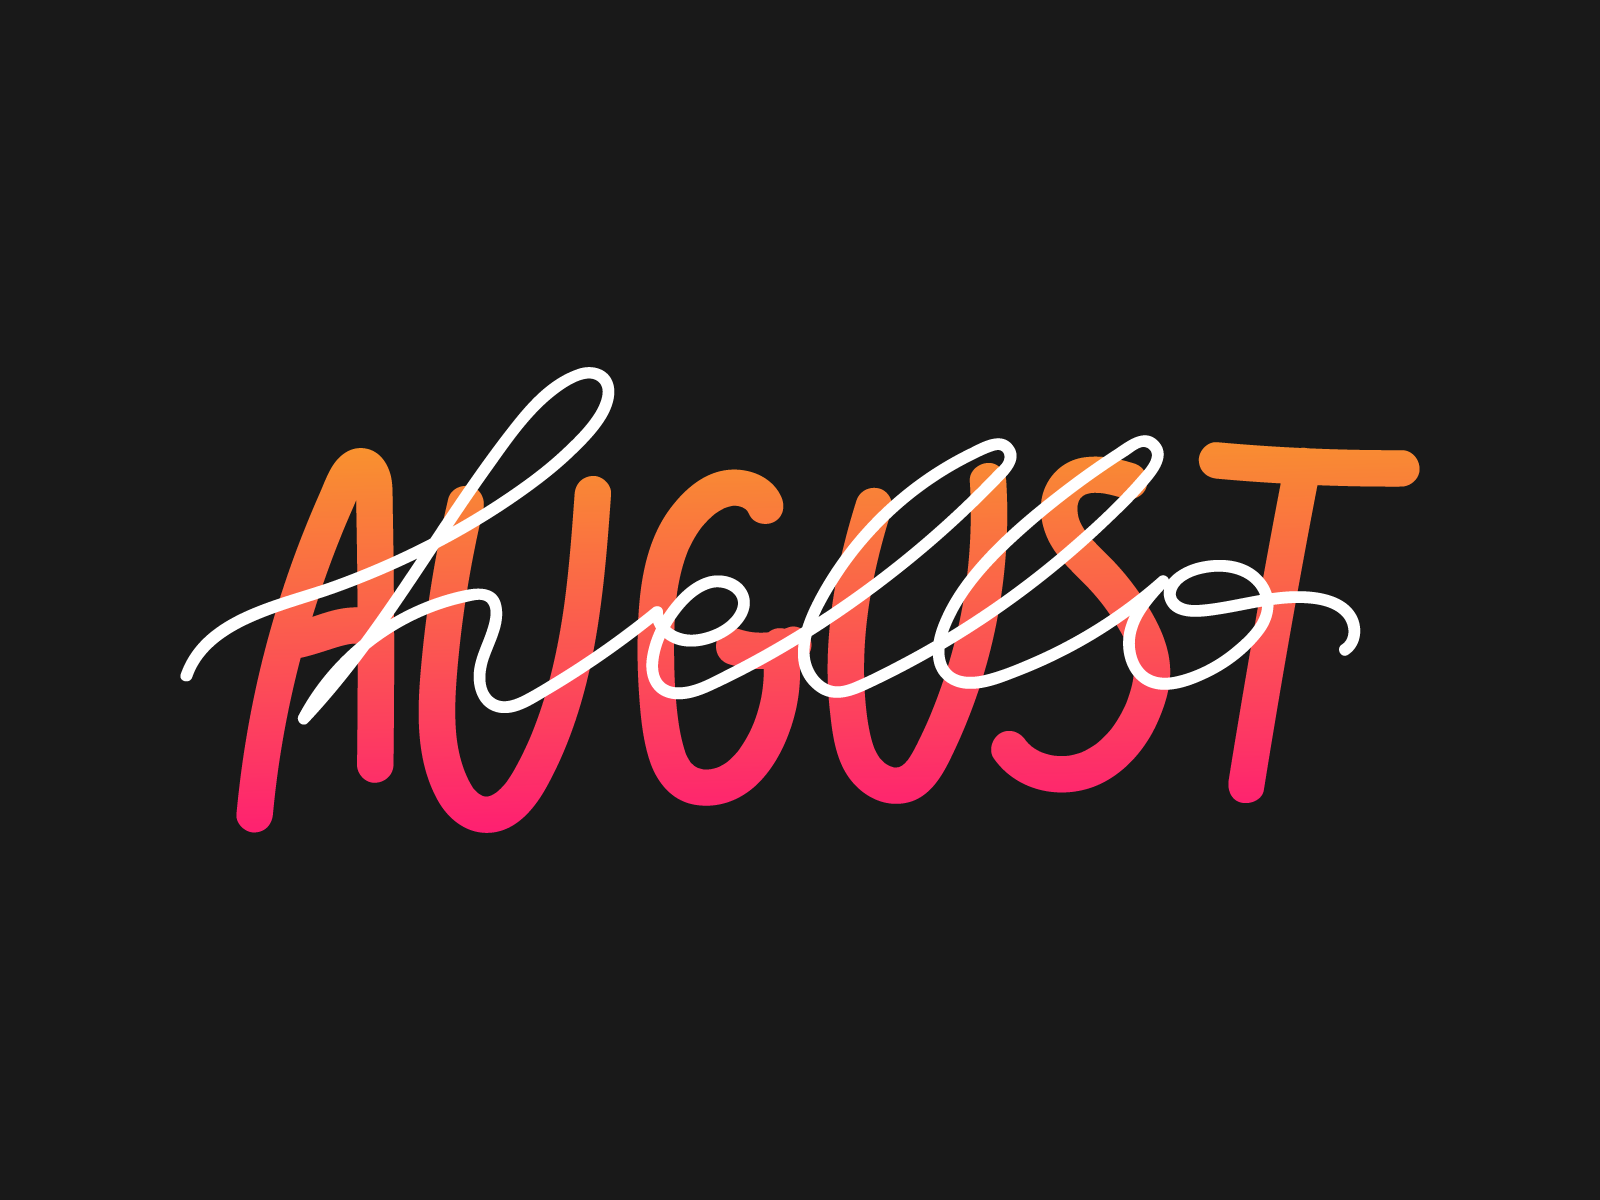 Hello August by DesignLab on Dribbble